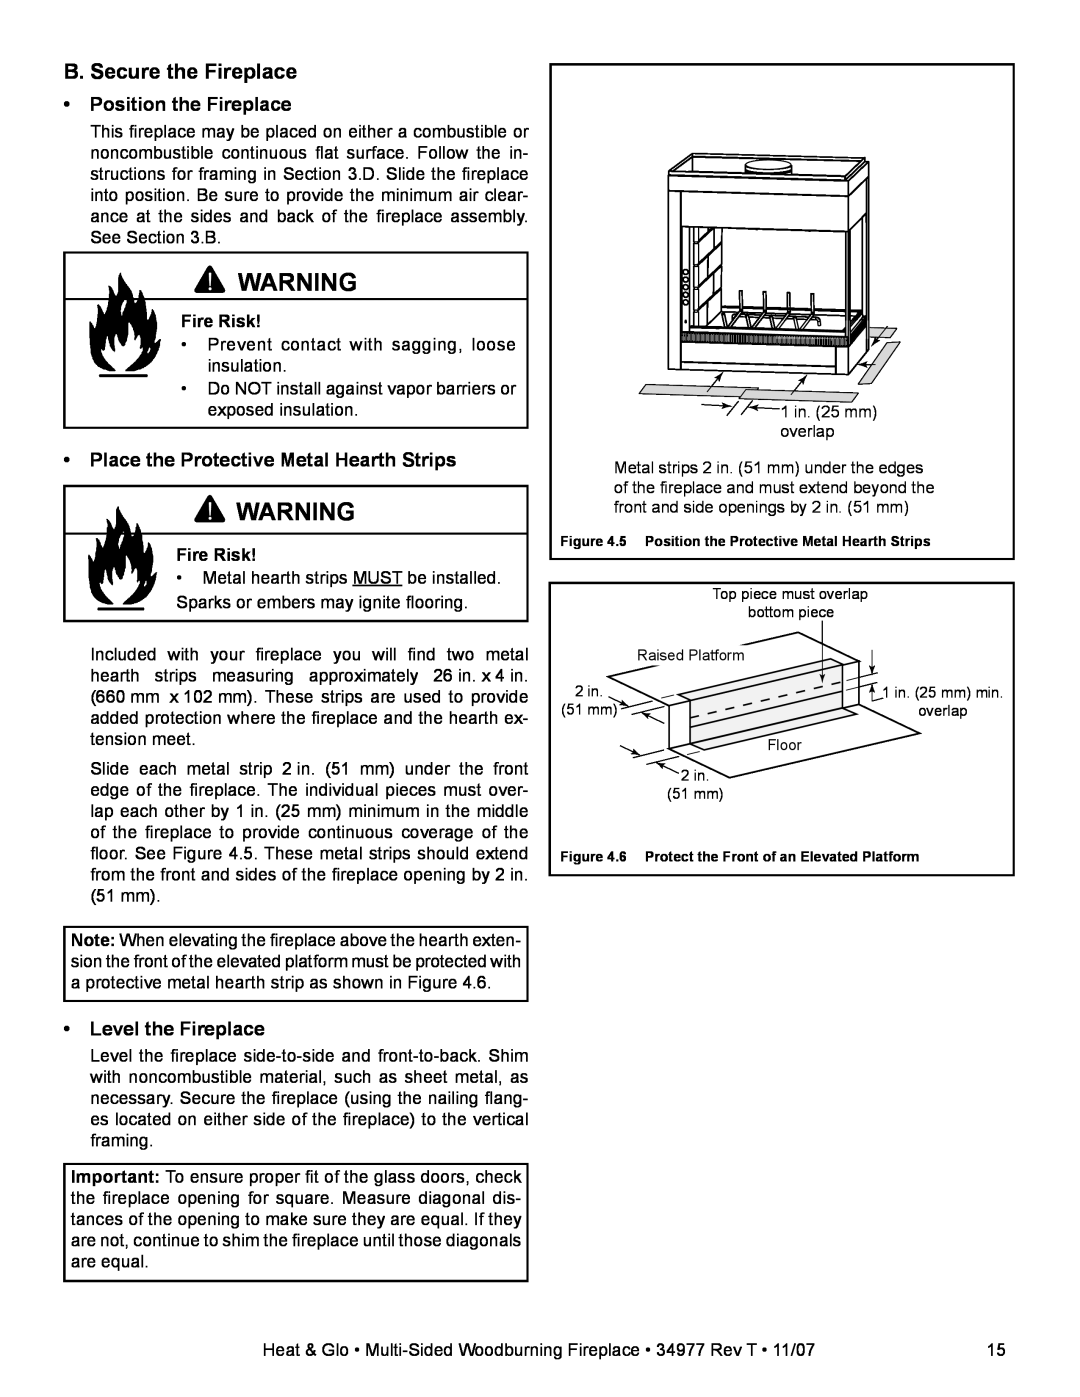 Heat & Glo LifeStyle BAY-40 B. Secure the Fireplace, Position the Fireplace, Place the Protective Metal Hearth Strips 